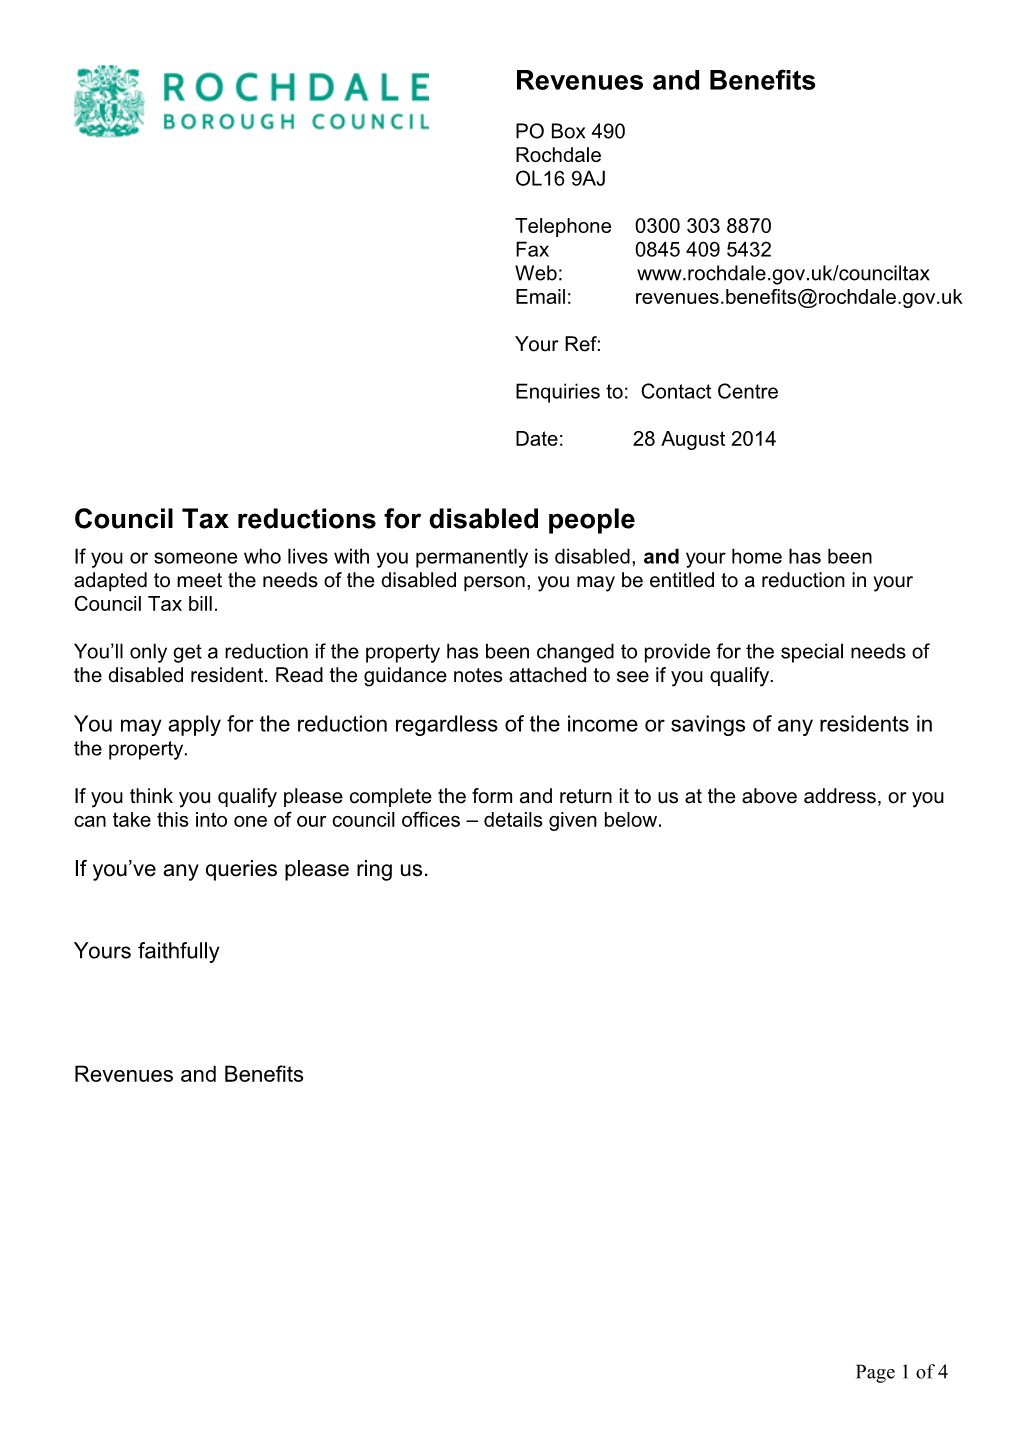 Council Tax Reductions for Disabled People